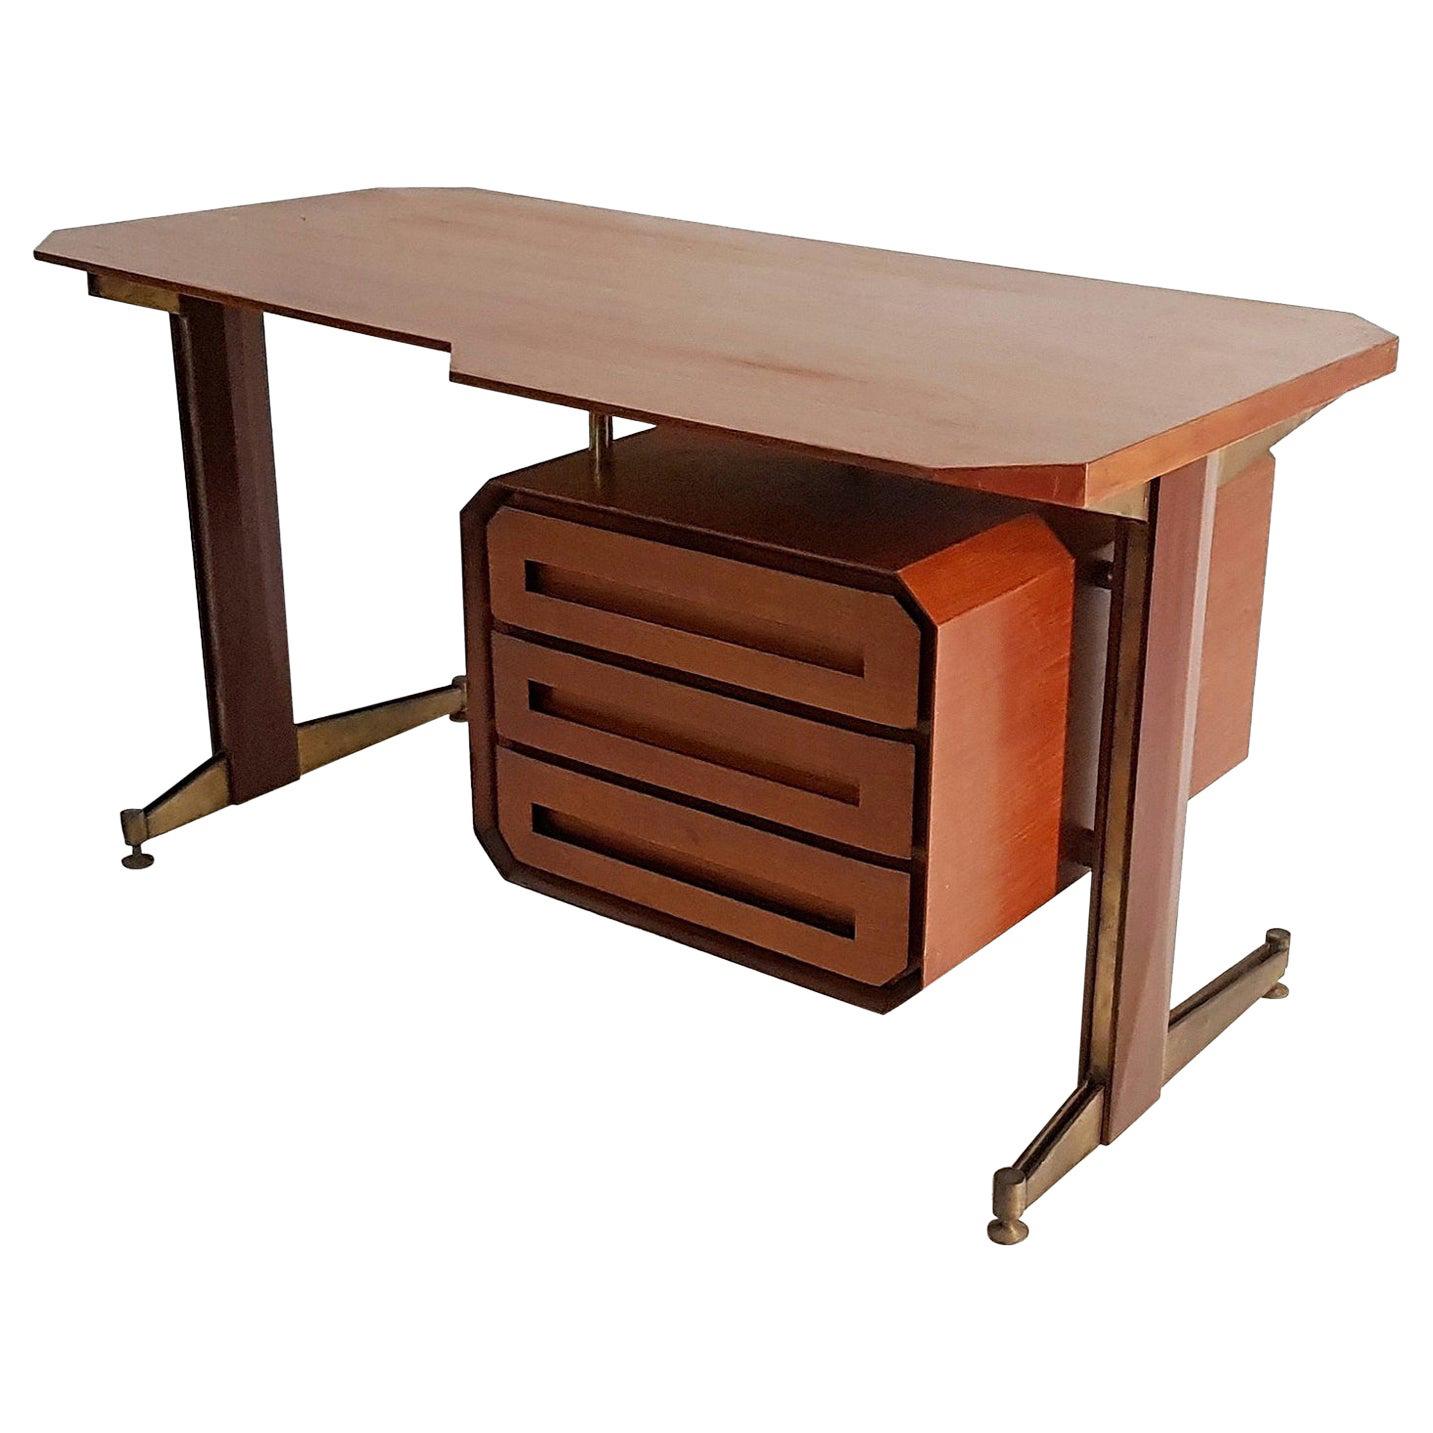 Beautifully designed Italian writing desk in teak and brushed brass. With a very distinct design this desks every wood surface has been given specific angles such as the tabletop, the unit with drawers as well as the side of the legs. The angles as